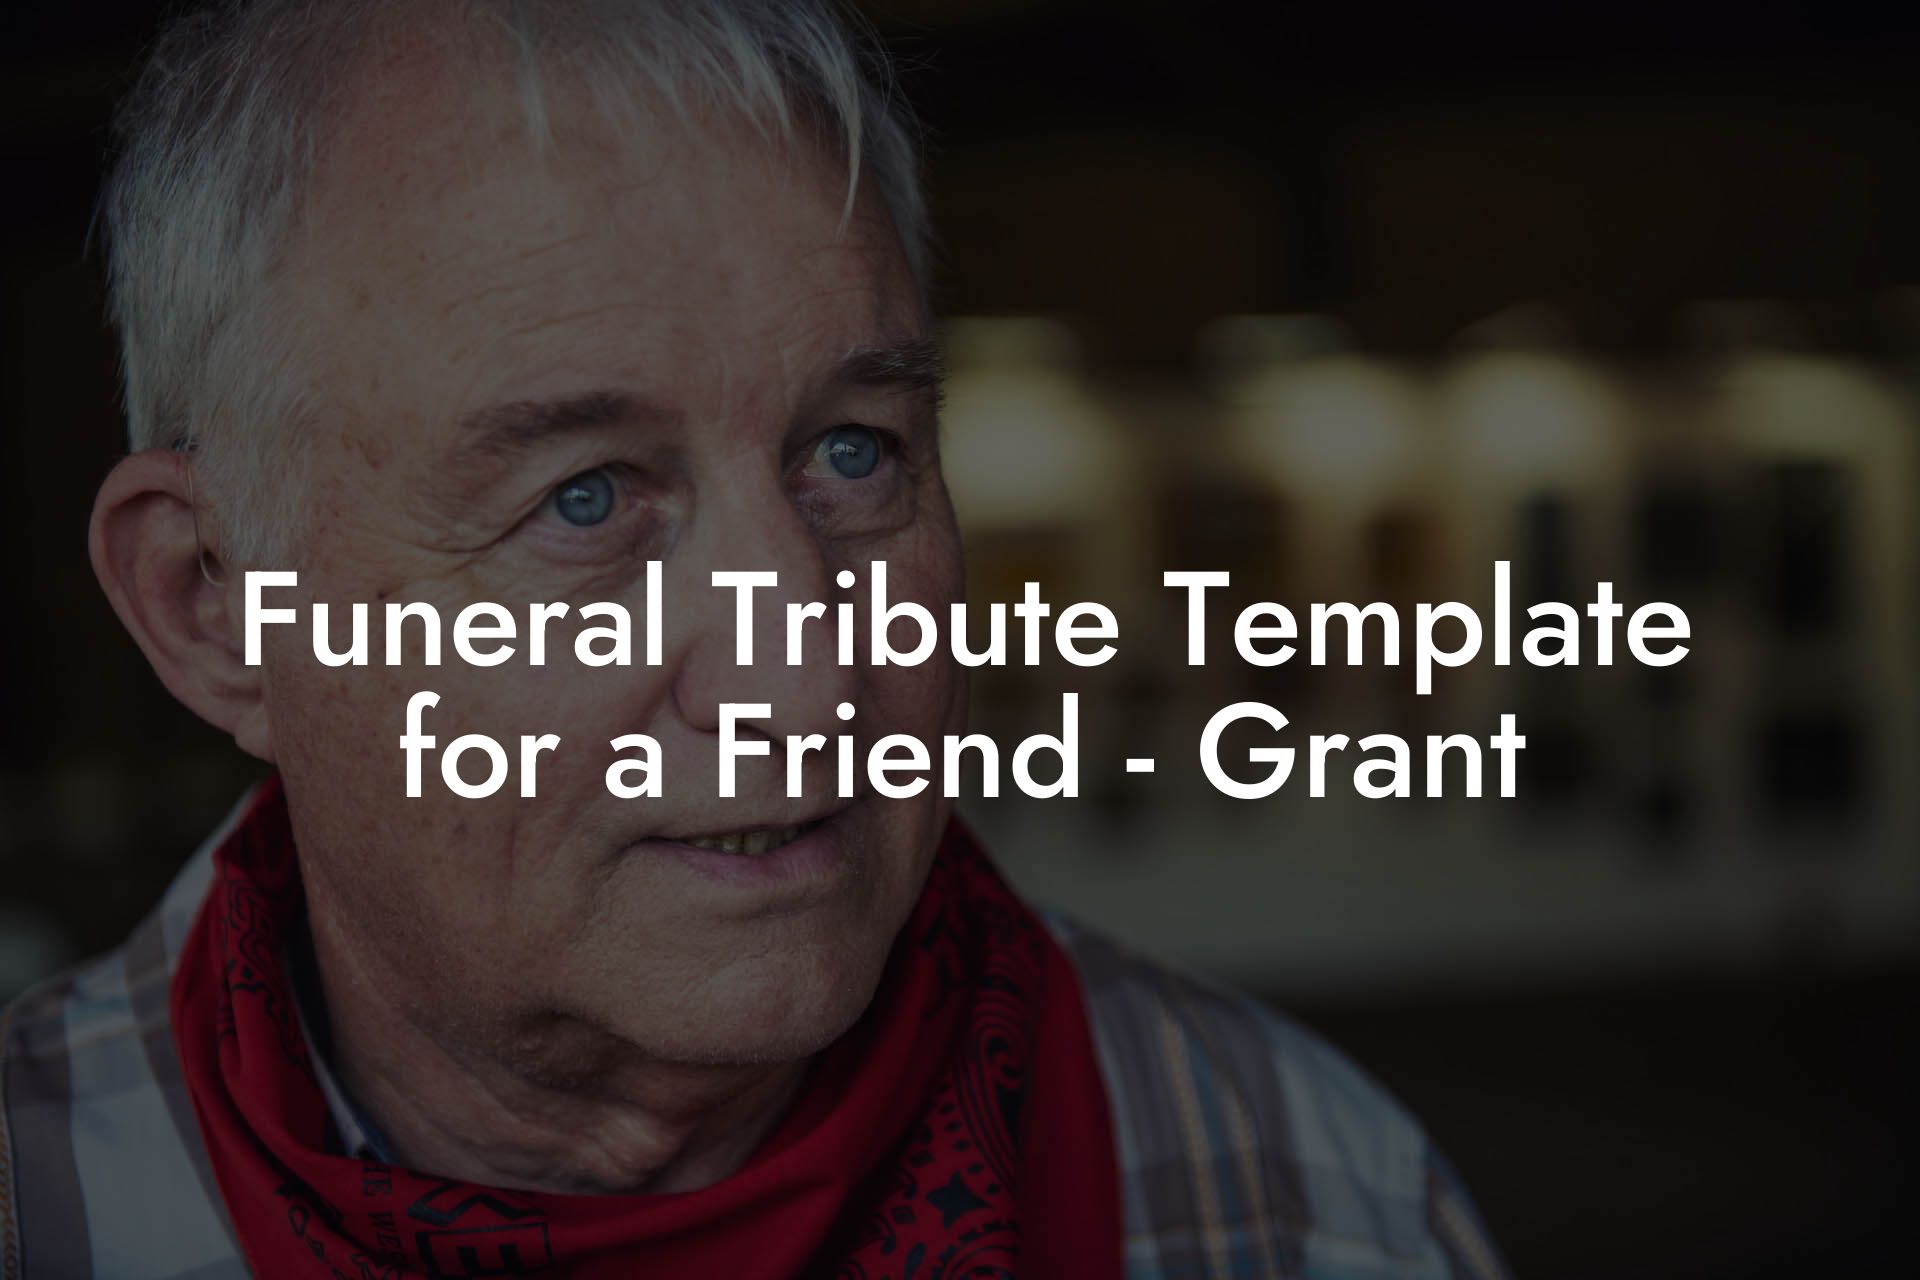 Funeral Tribute Template for a Friend - Grant